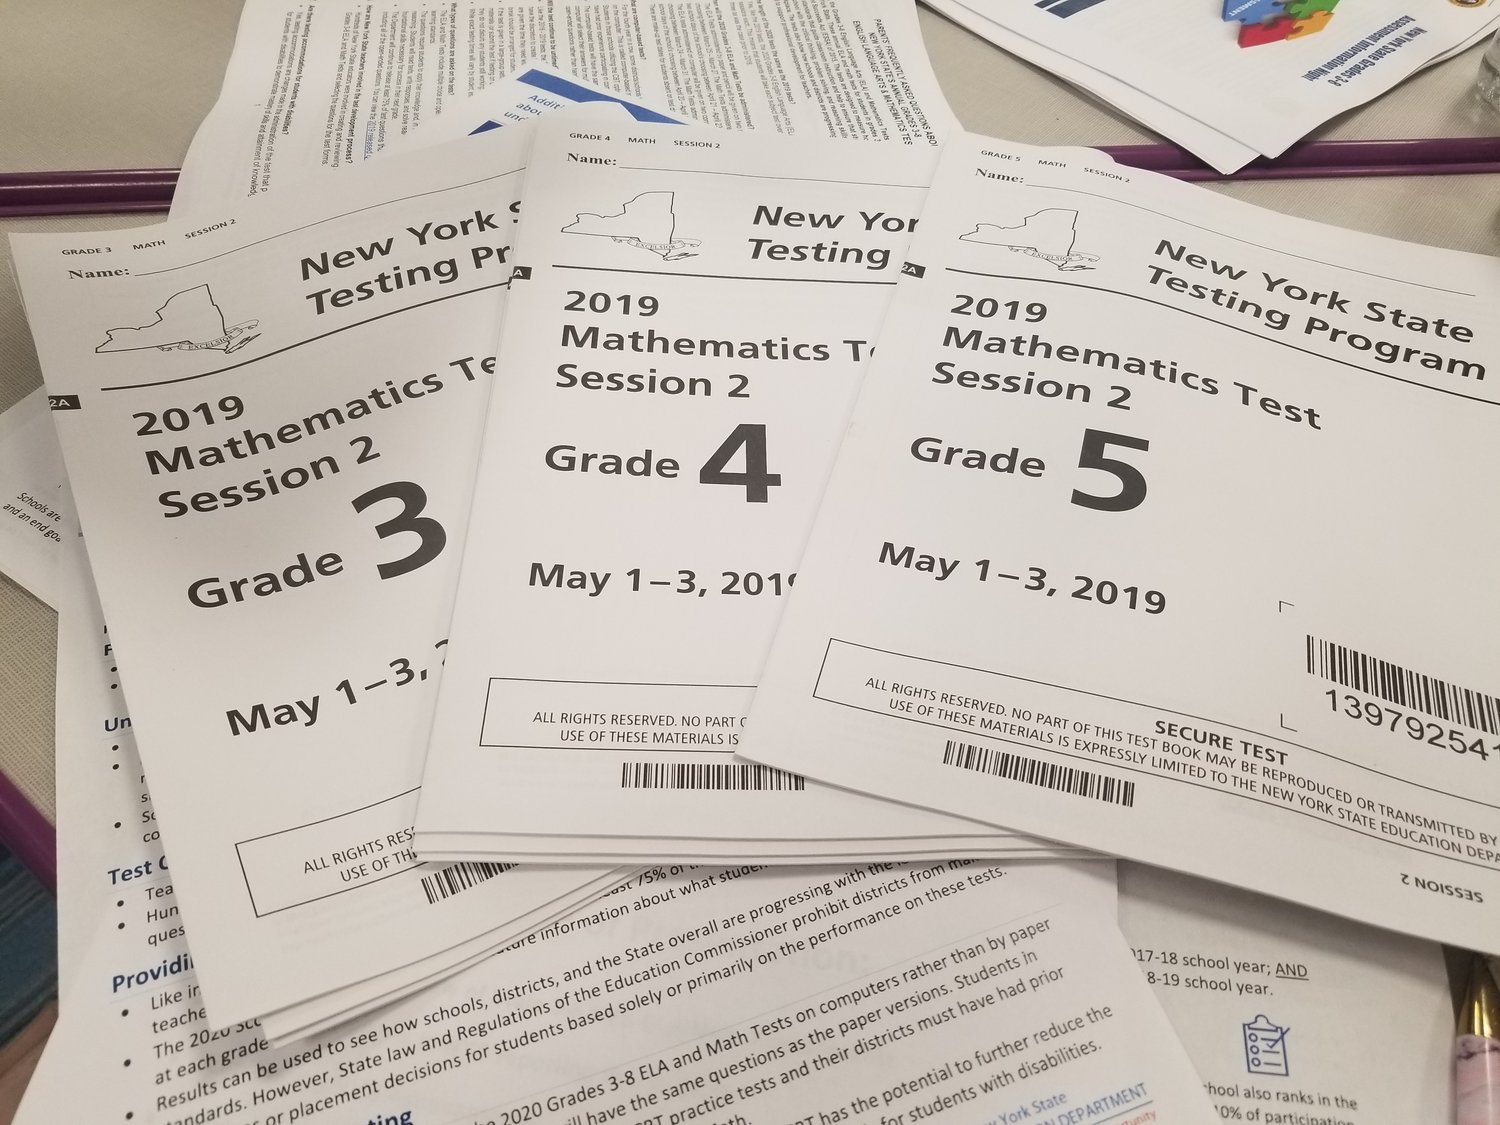 Should your child take the NYS assessment tests? The Long Island Advance